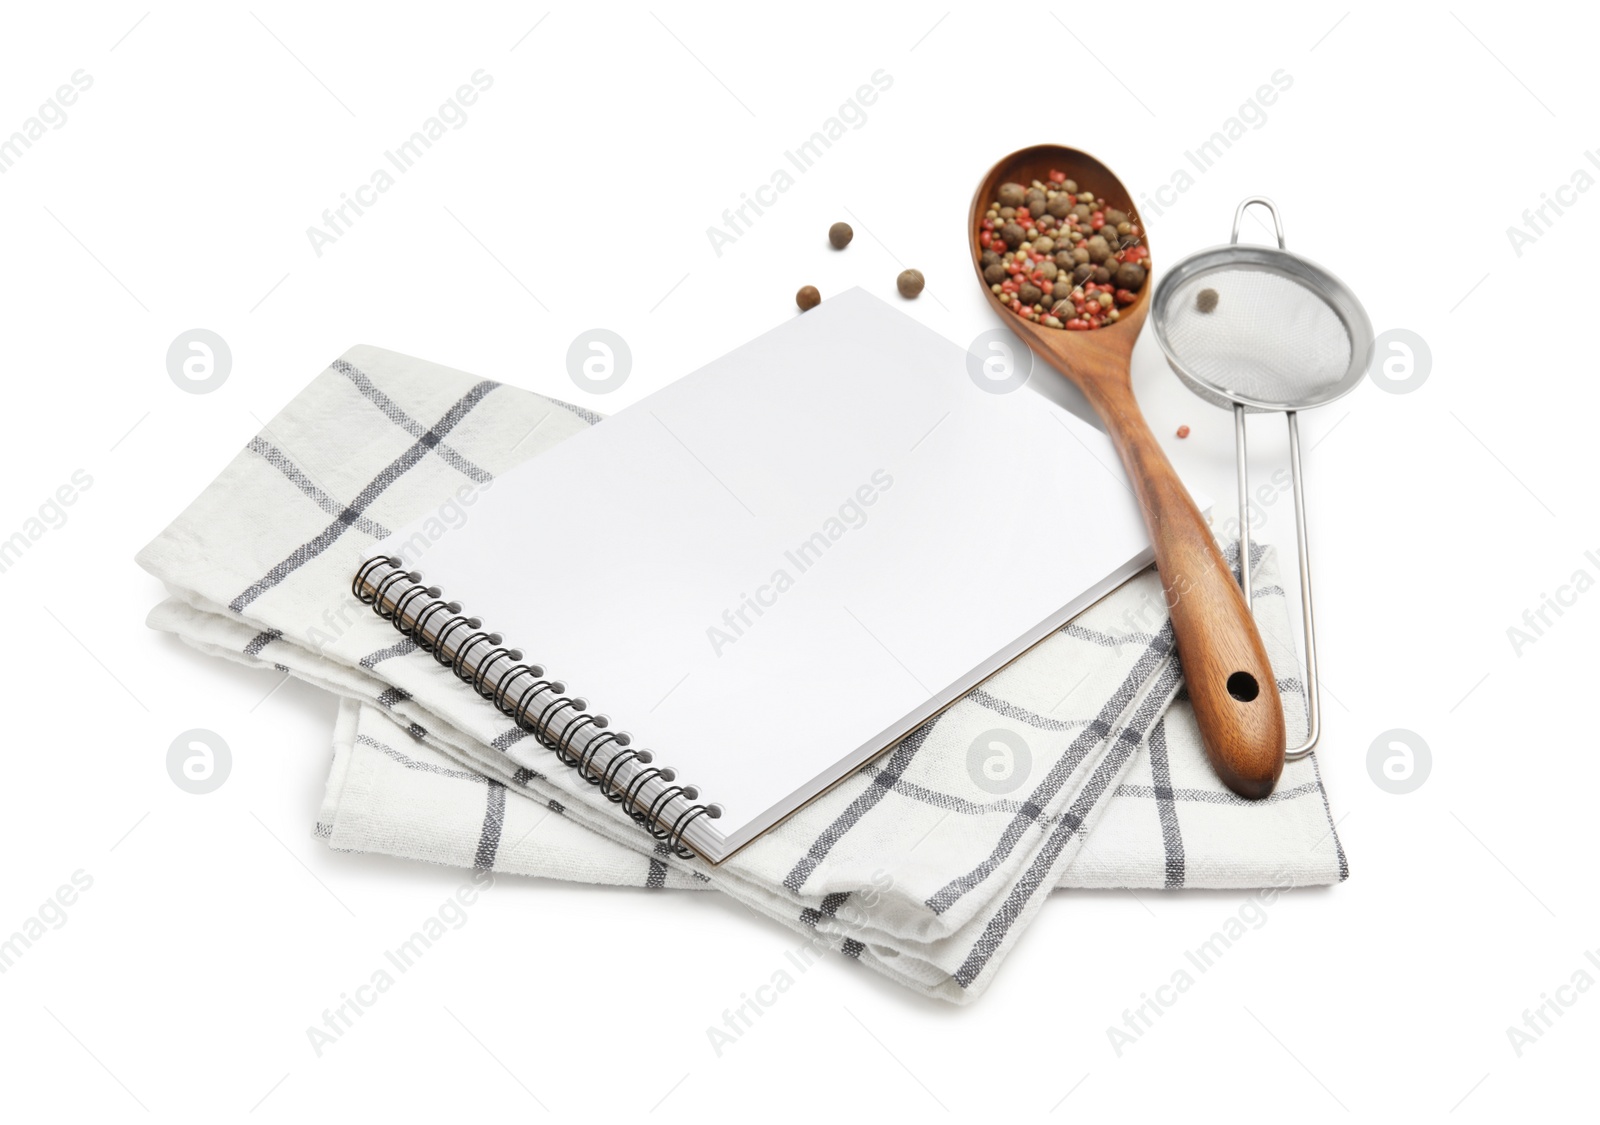 Photo of Blank recipe book, spices, napkin and kitchen utensils on white background. Space for text